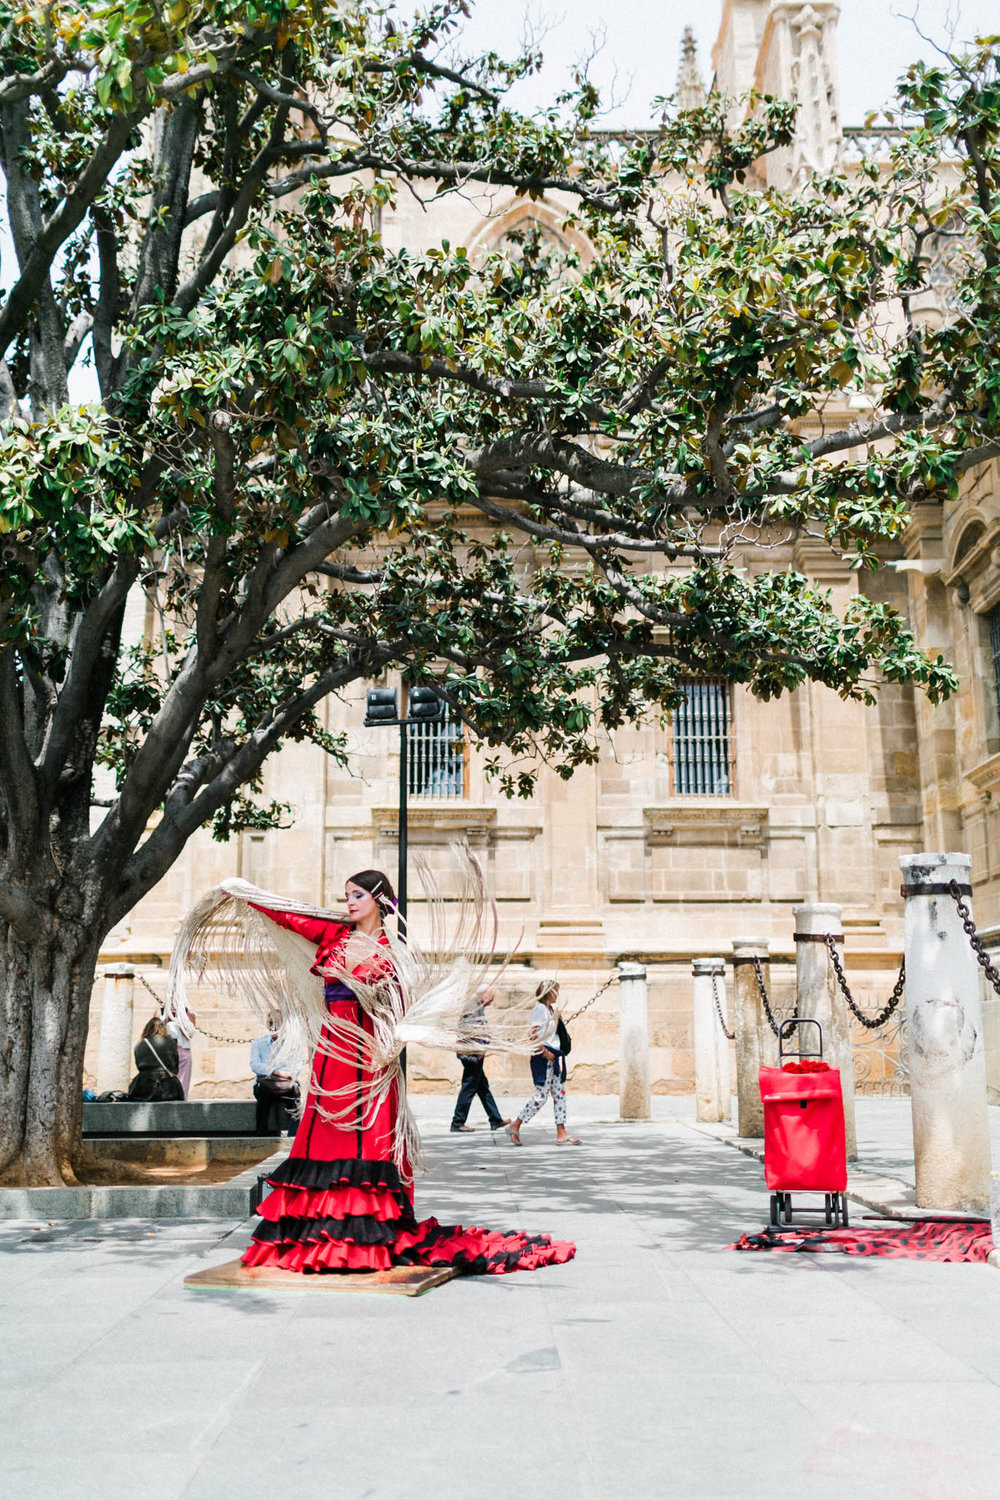 This beautiful woman just casually flamenco dancing on a beautiful corner of the cathedral.  Her moves were  powerful.